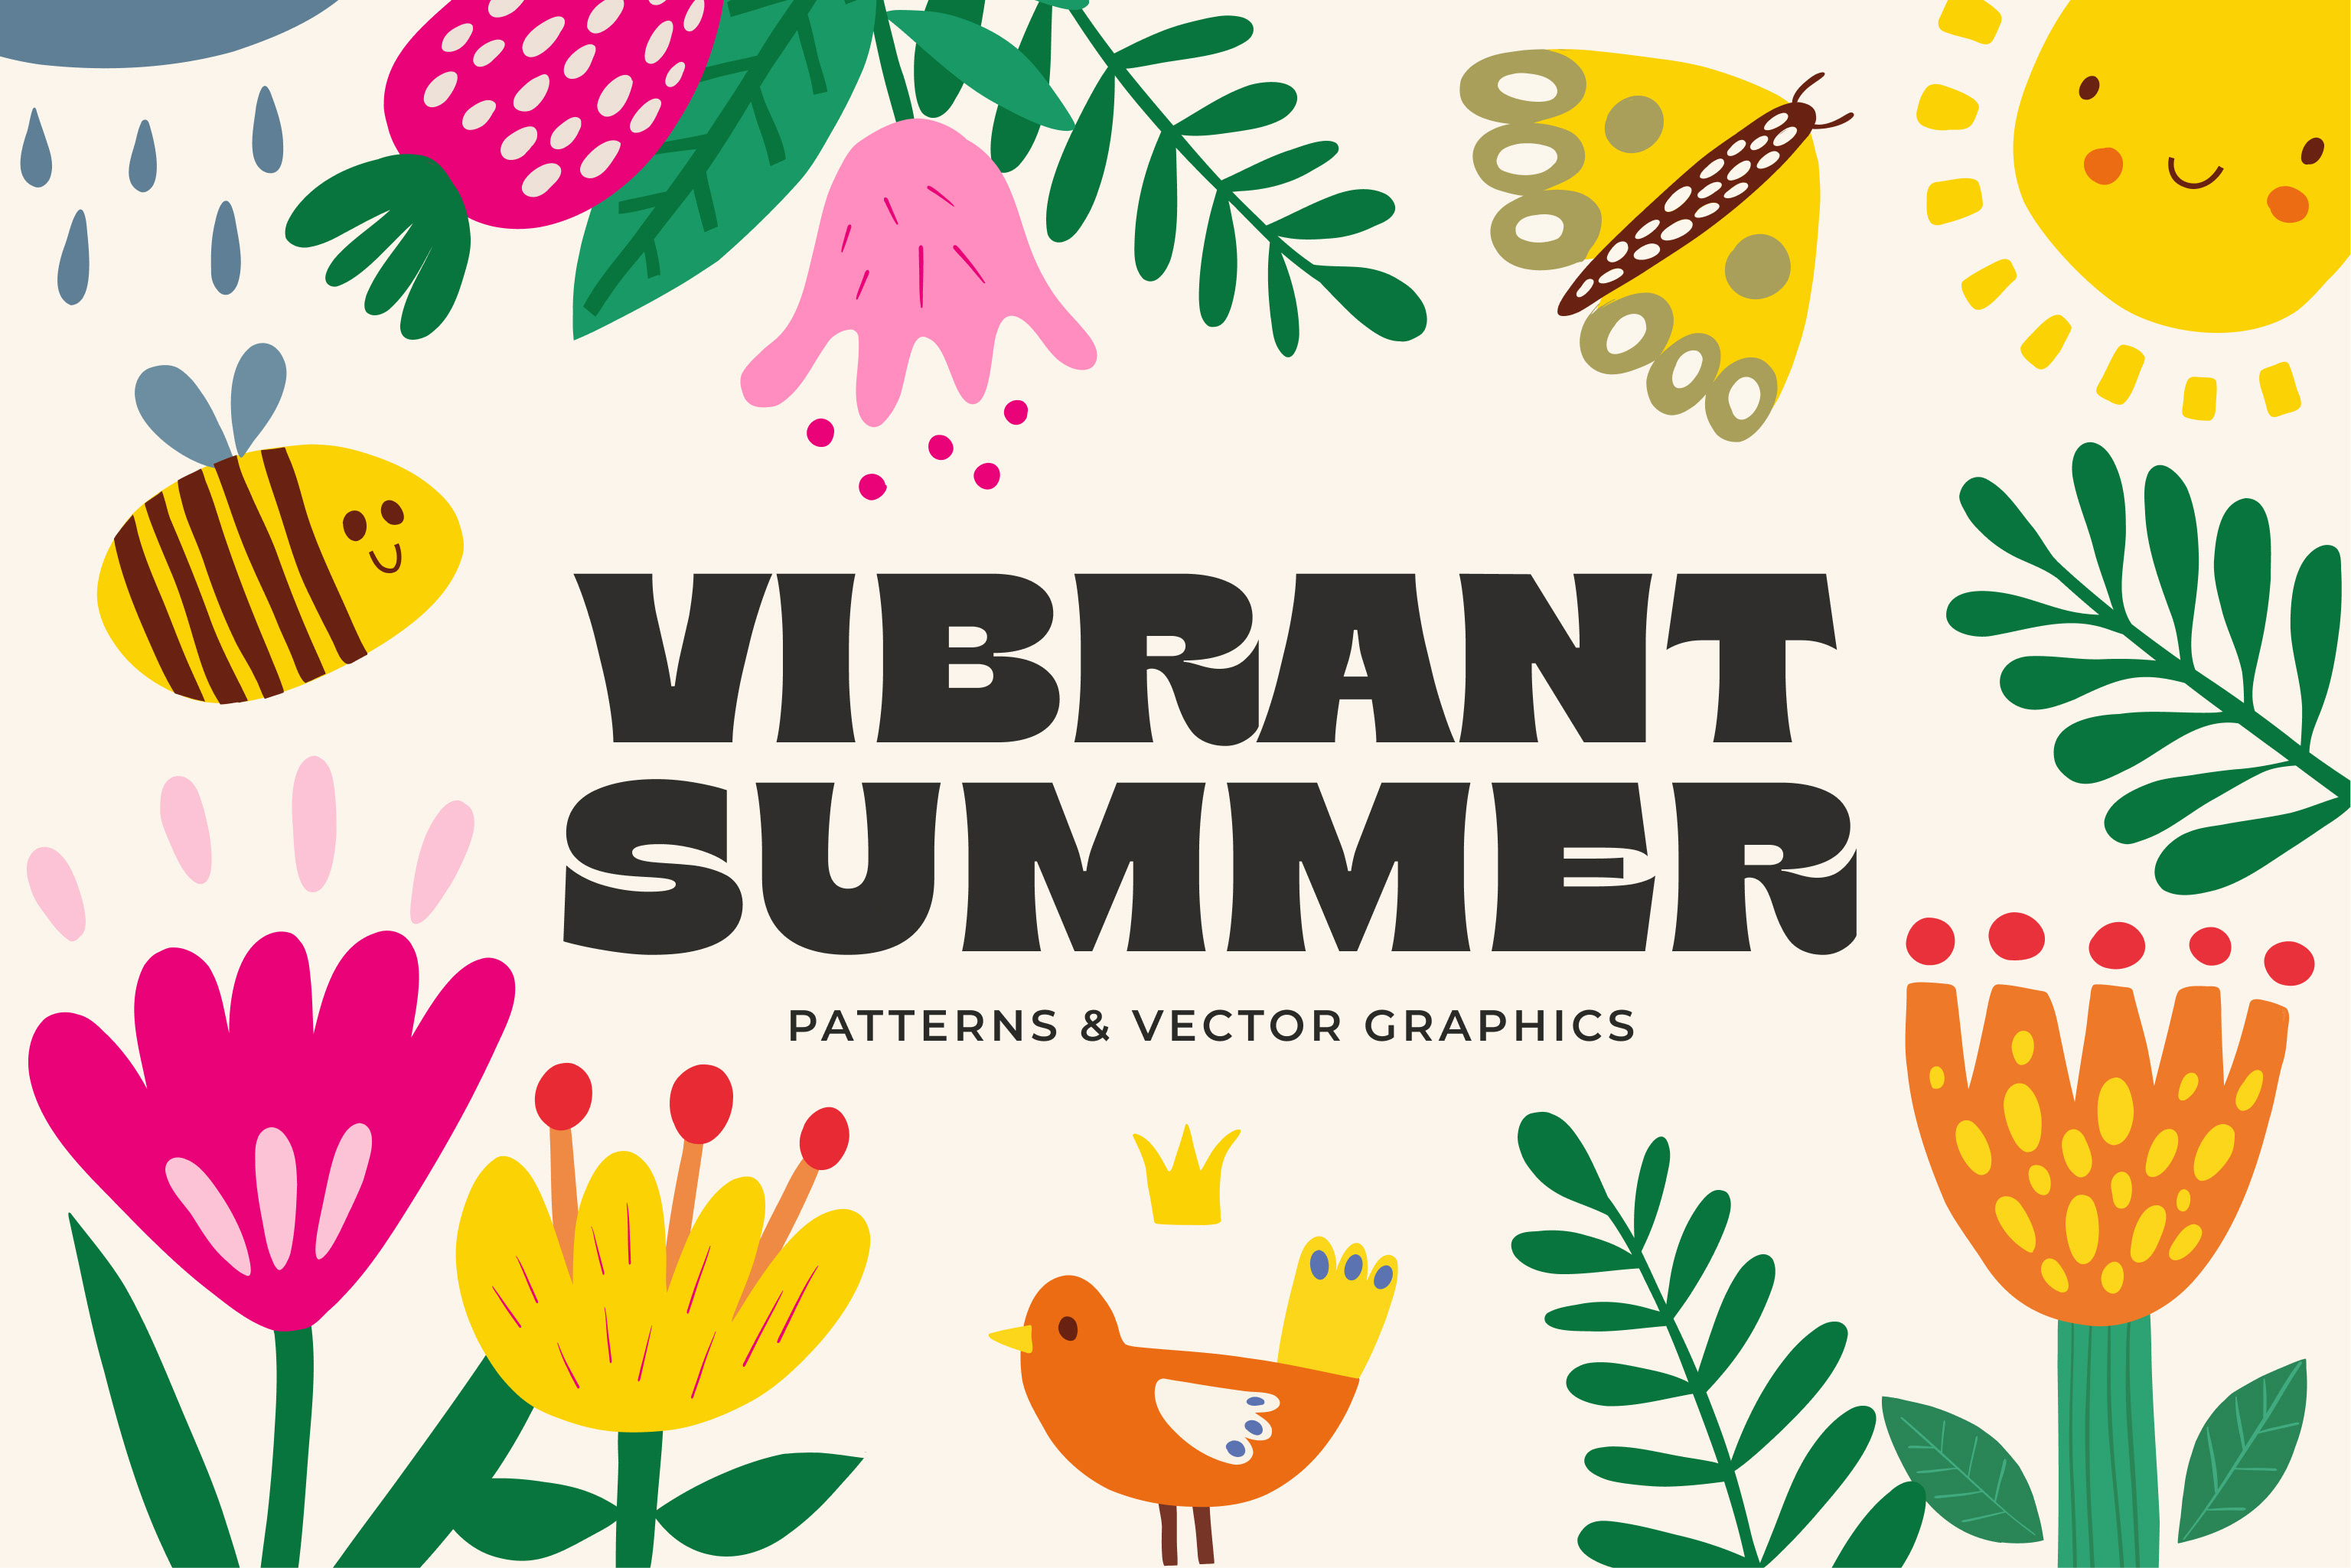 VIBRANT SUMMER patterns and graphics rendition image